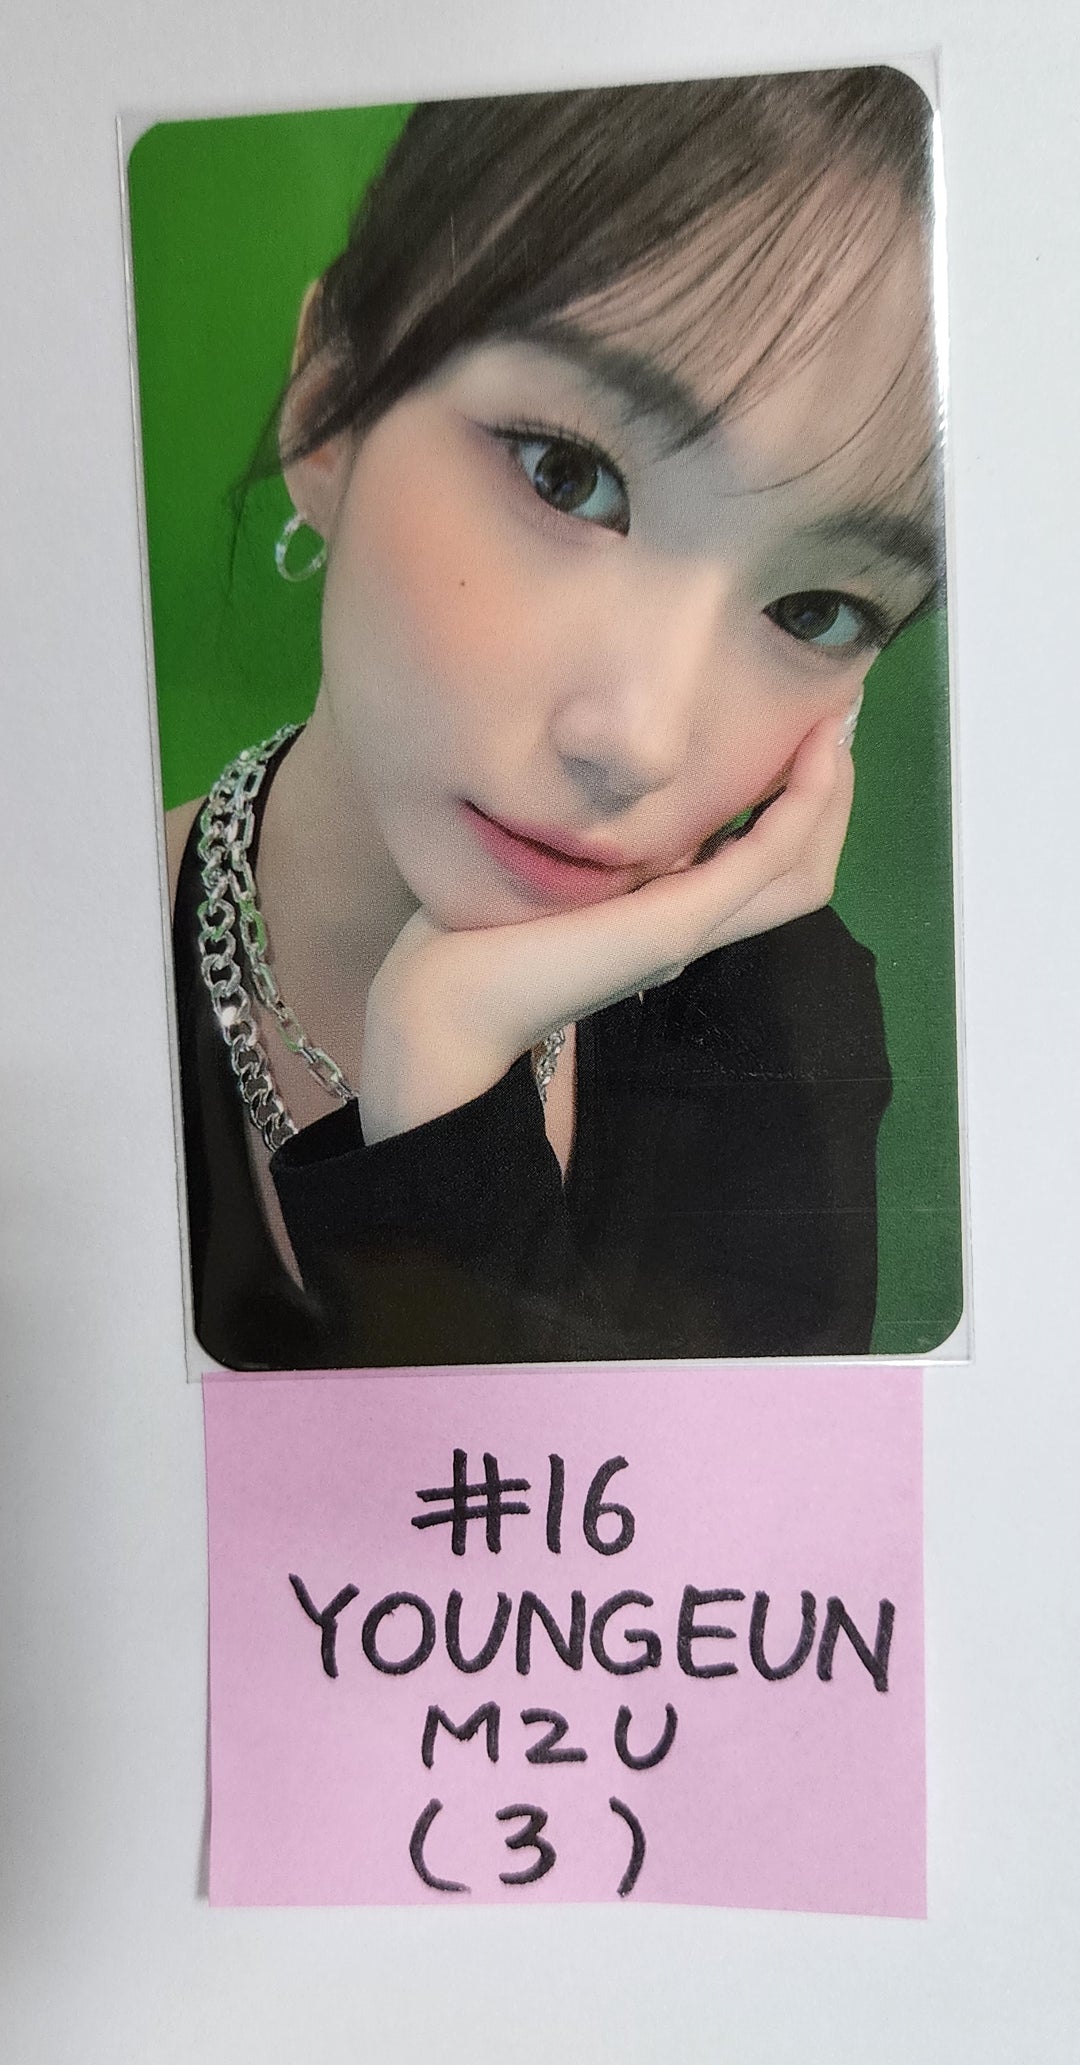 Kep1er "TROUBLESHOOTER" - M2U Lucky Draw Event Slim PVC Photocard